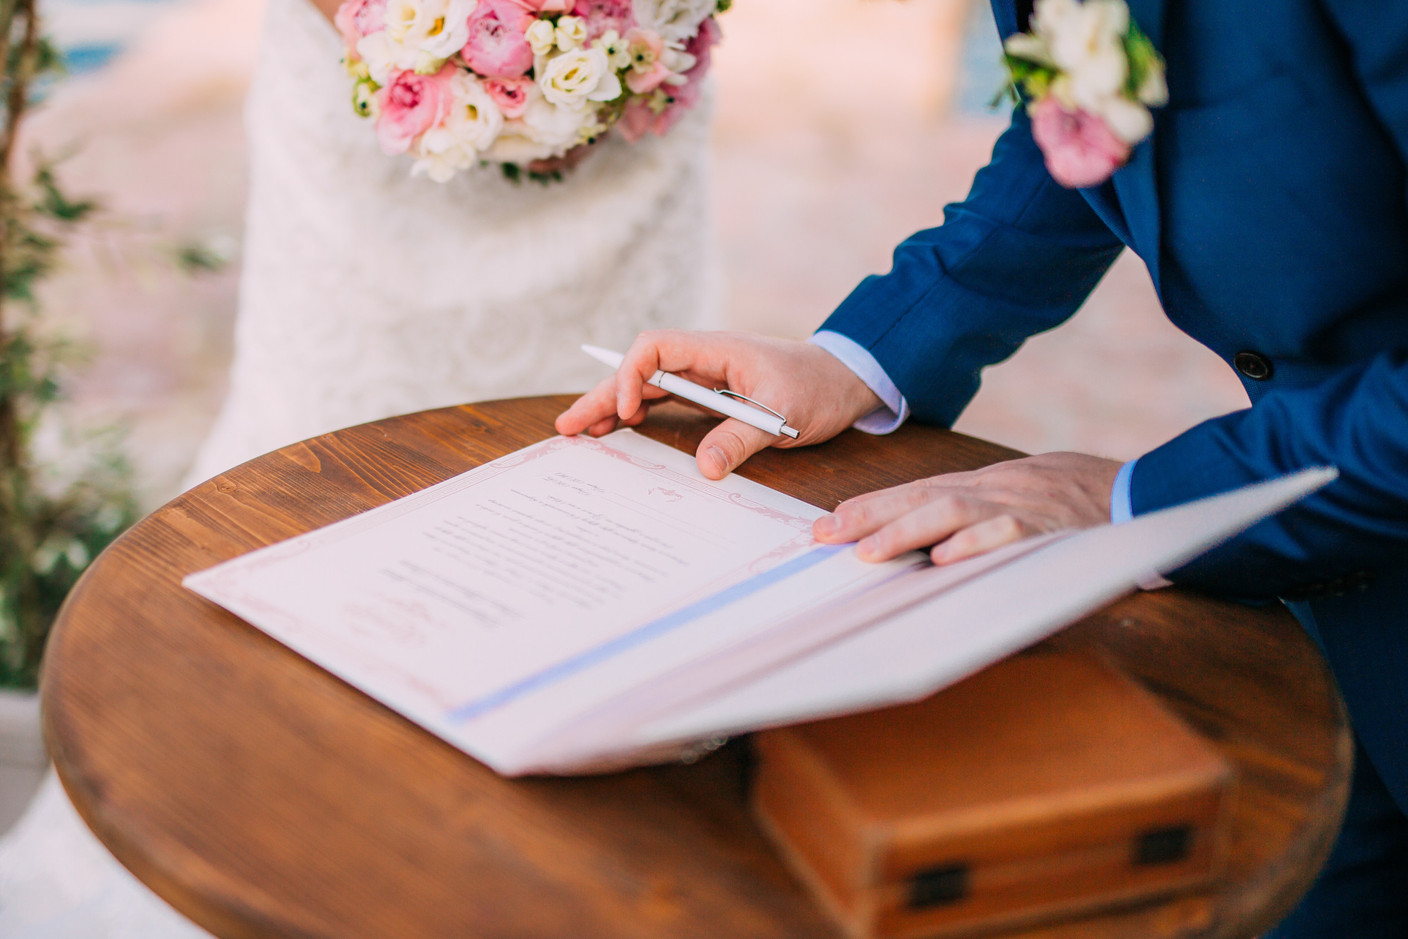  Municipal councils will in the future release a list of possible locations to celebrate matrimony and civil partnership (PACS) in their commune. This new bill regards only civil marriages and not church ceremonies. Photo: Shutterstock.